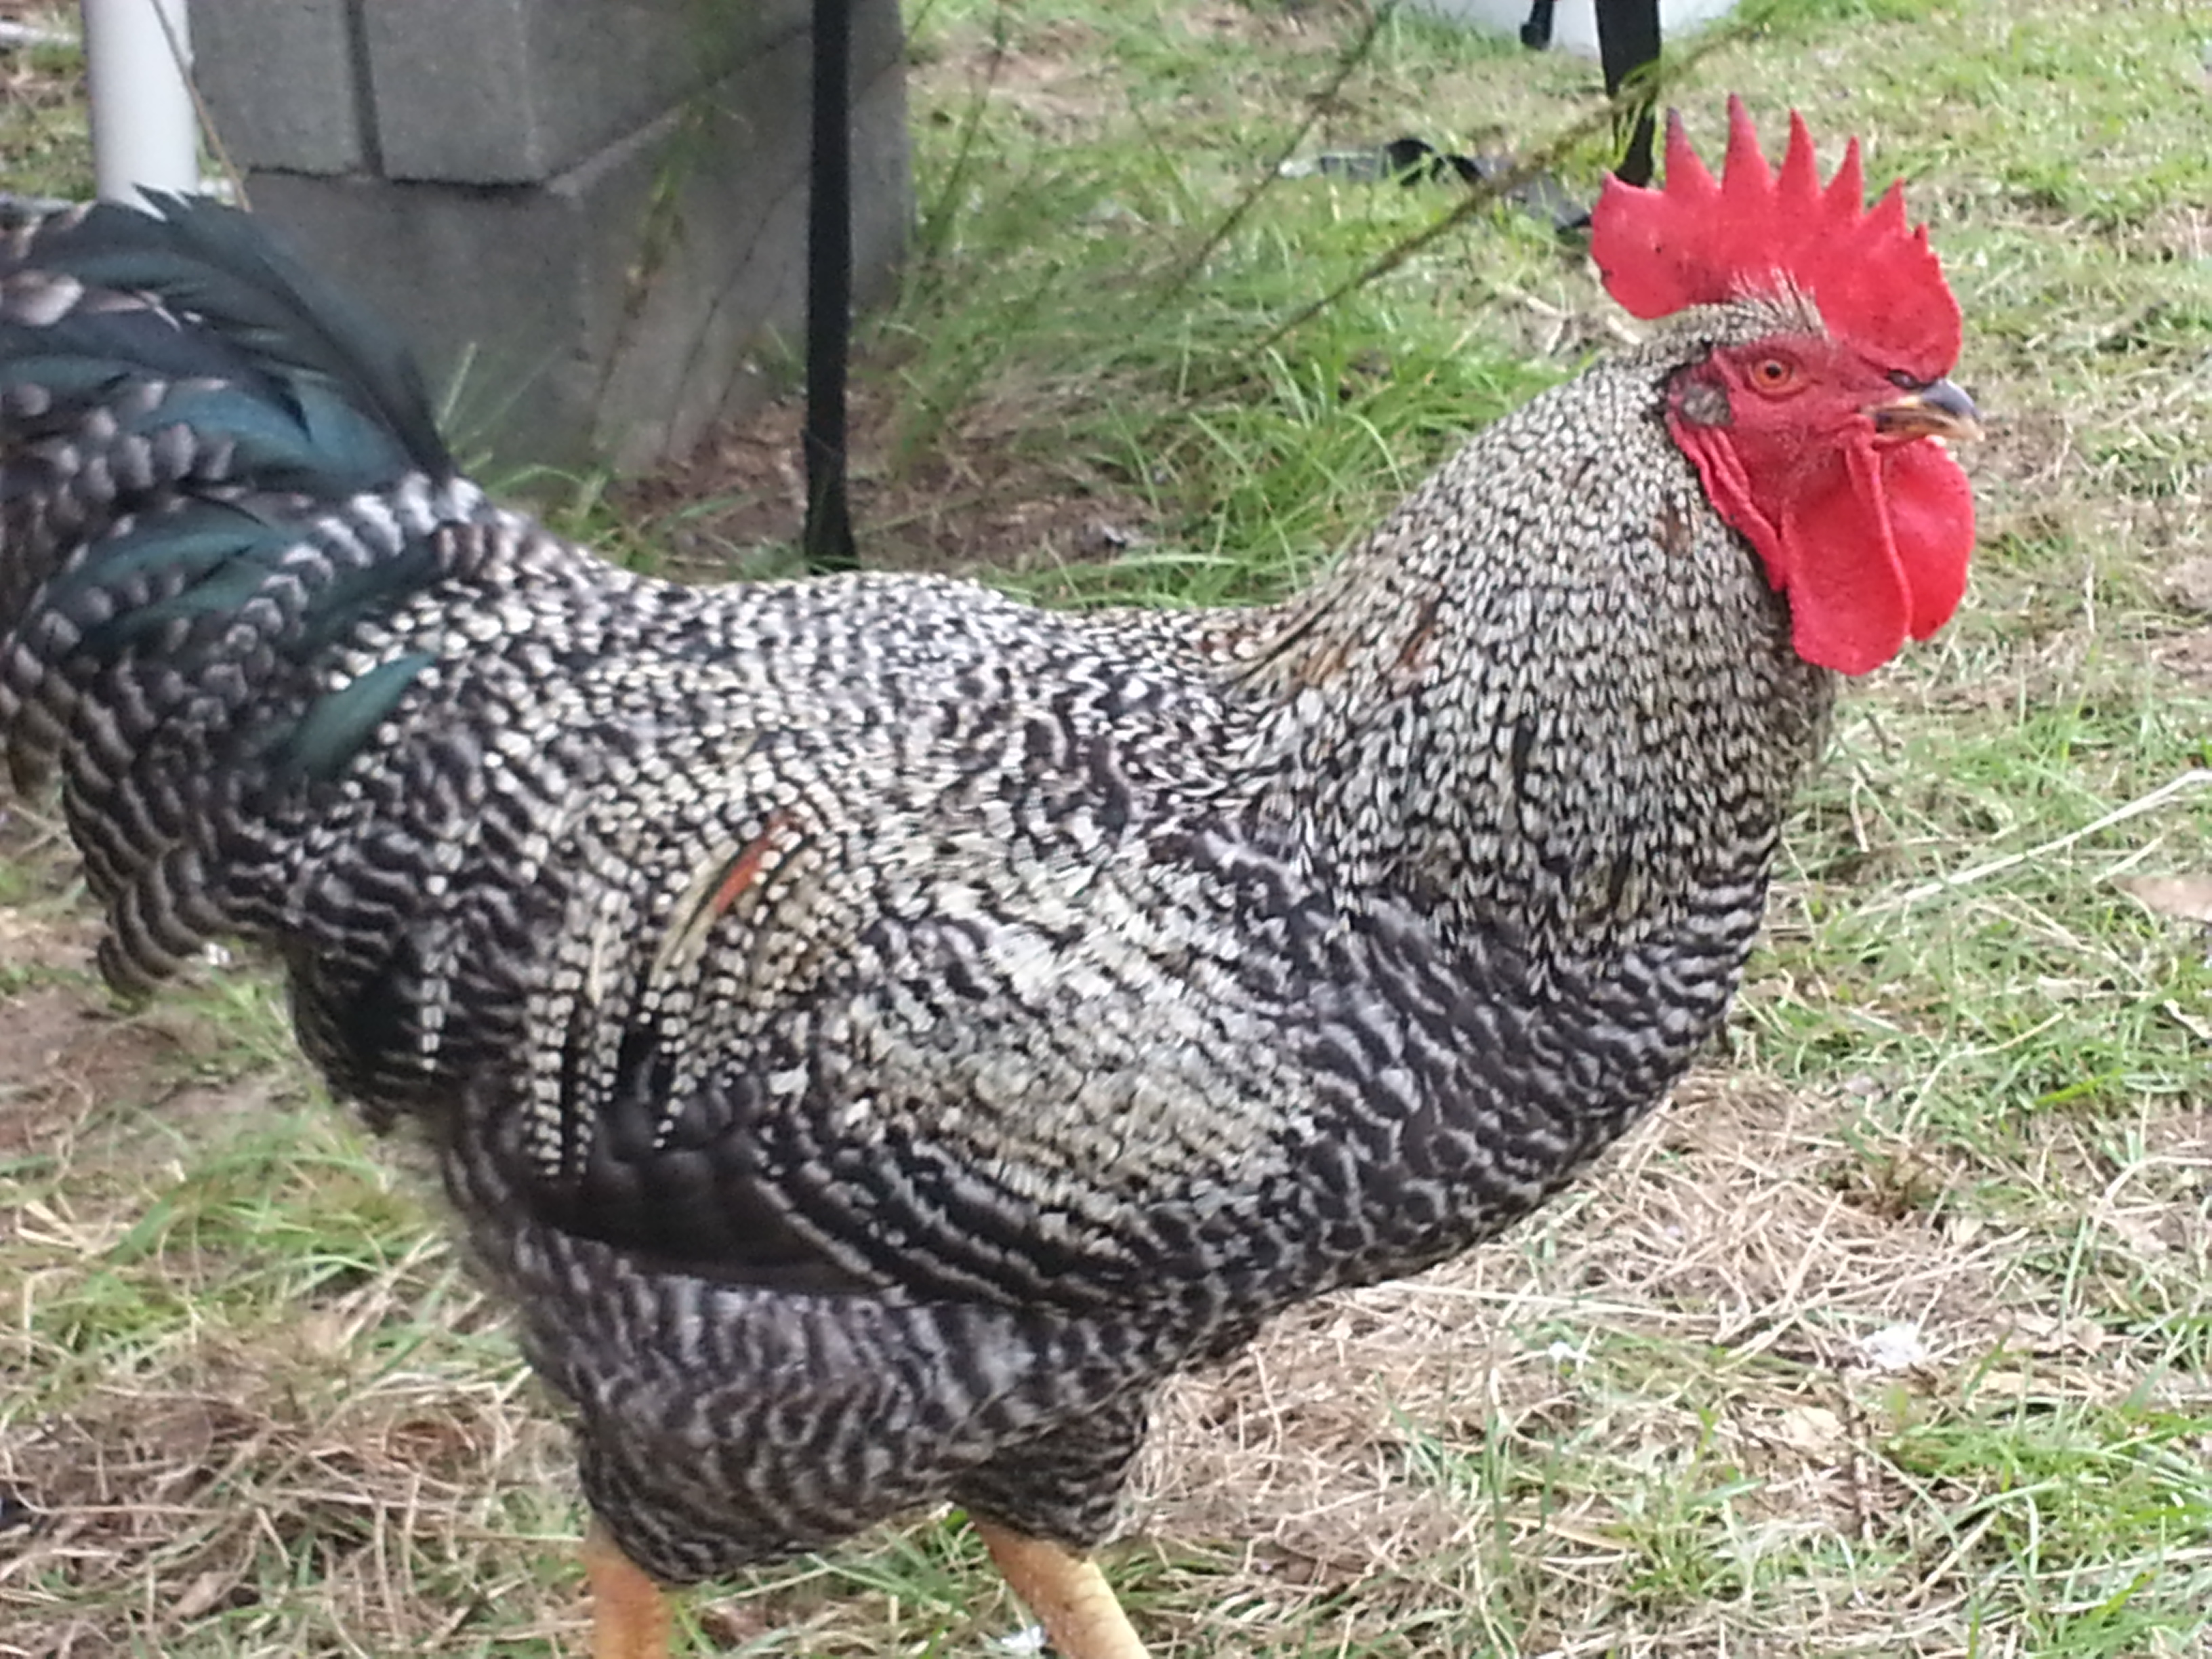 This is my barred rock all grown up... his name is bluto